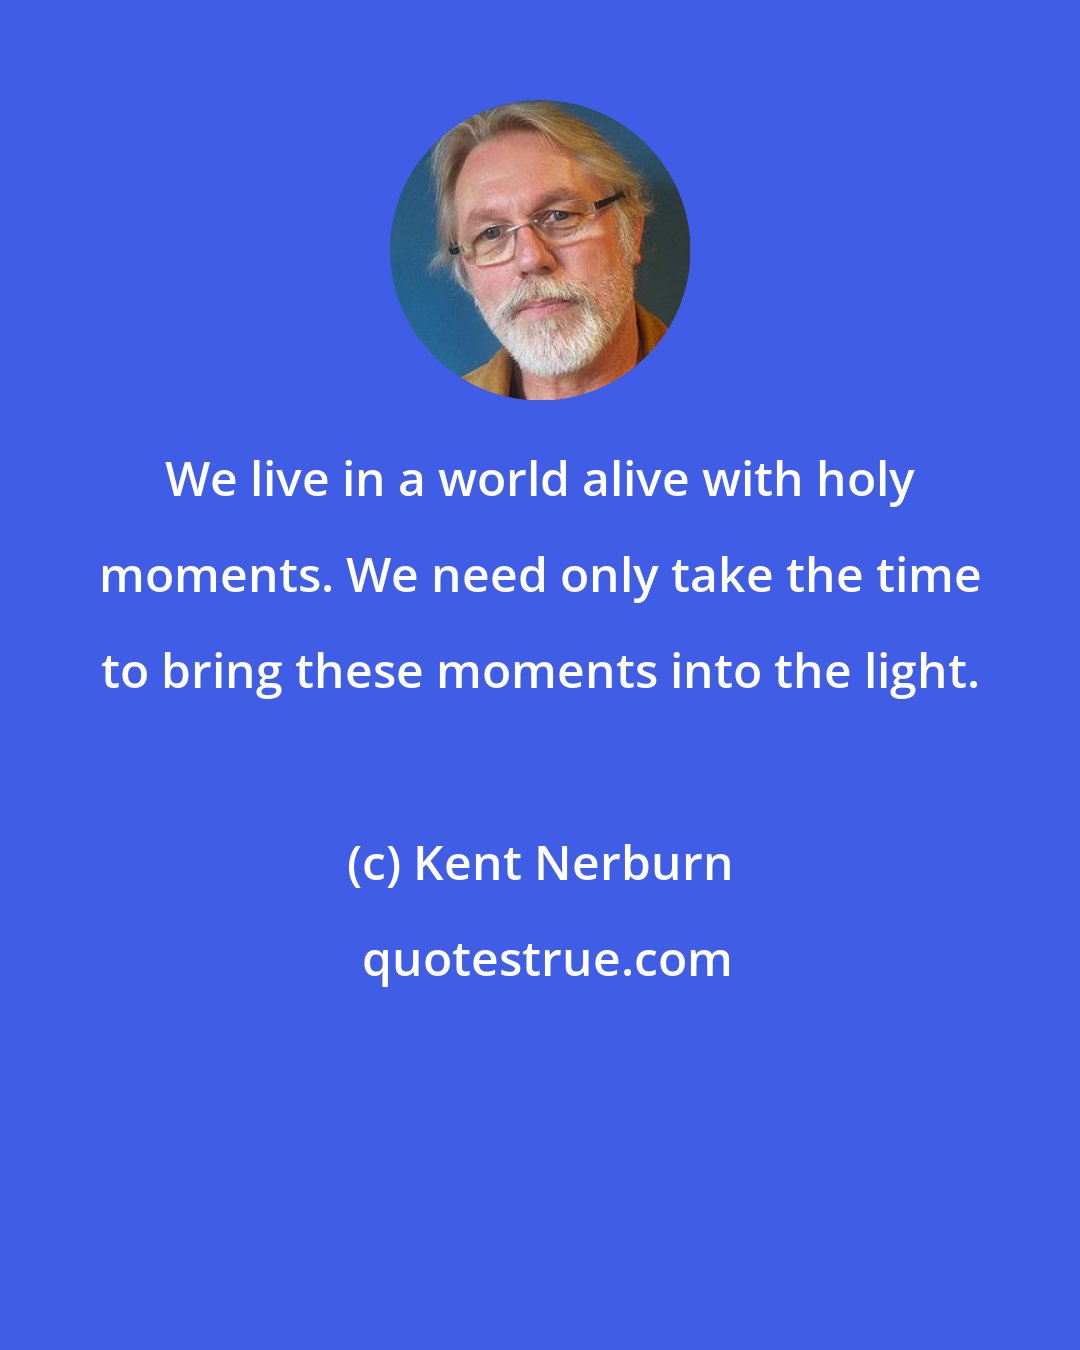 Kent Nerburn: We live in a world alive with holy moments. We need only take the time to bring these moments into the light.